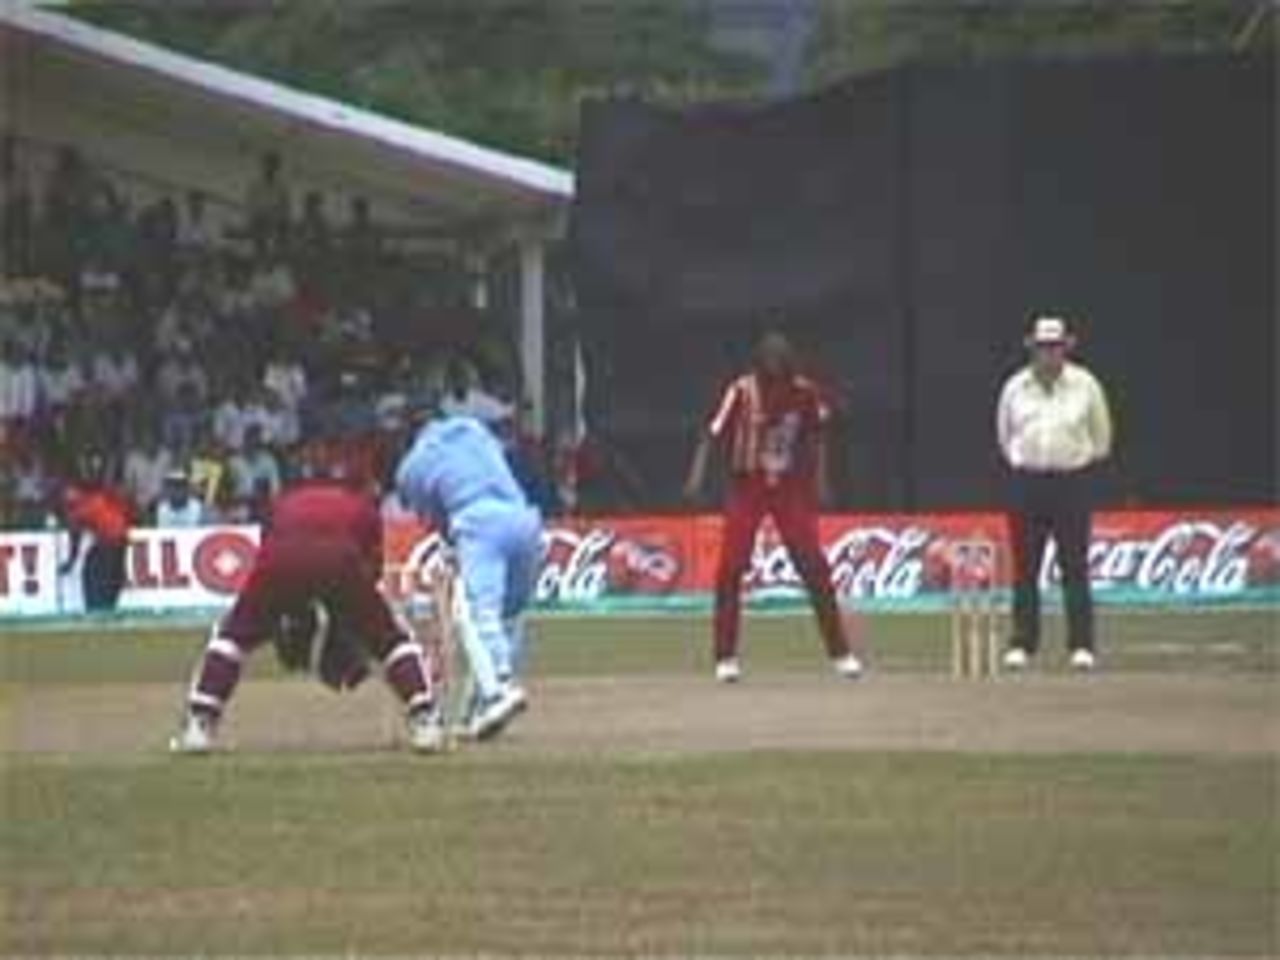 Perry looks on as Robin Singh defends, India v West Indies (Final), Coca-Cola Singapore Challenge, 1999-2000, Kallang Ground, Singapore, 7 Sep 1999.